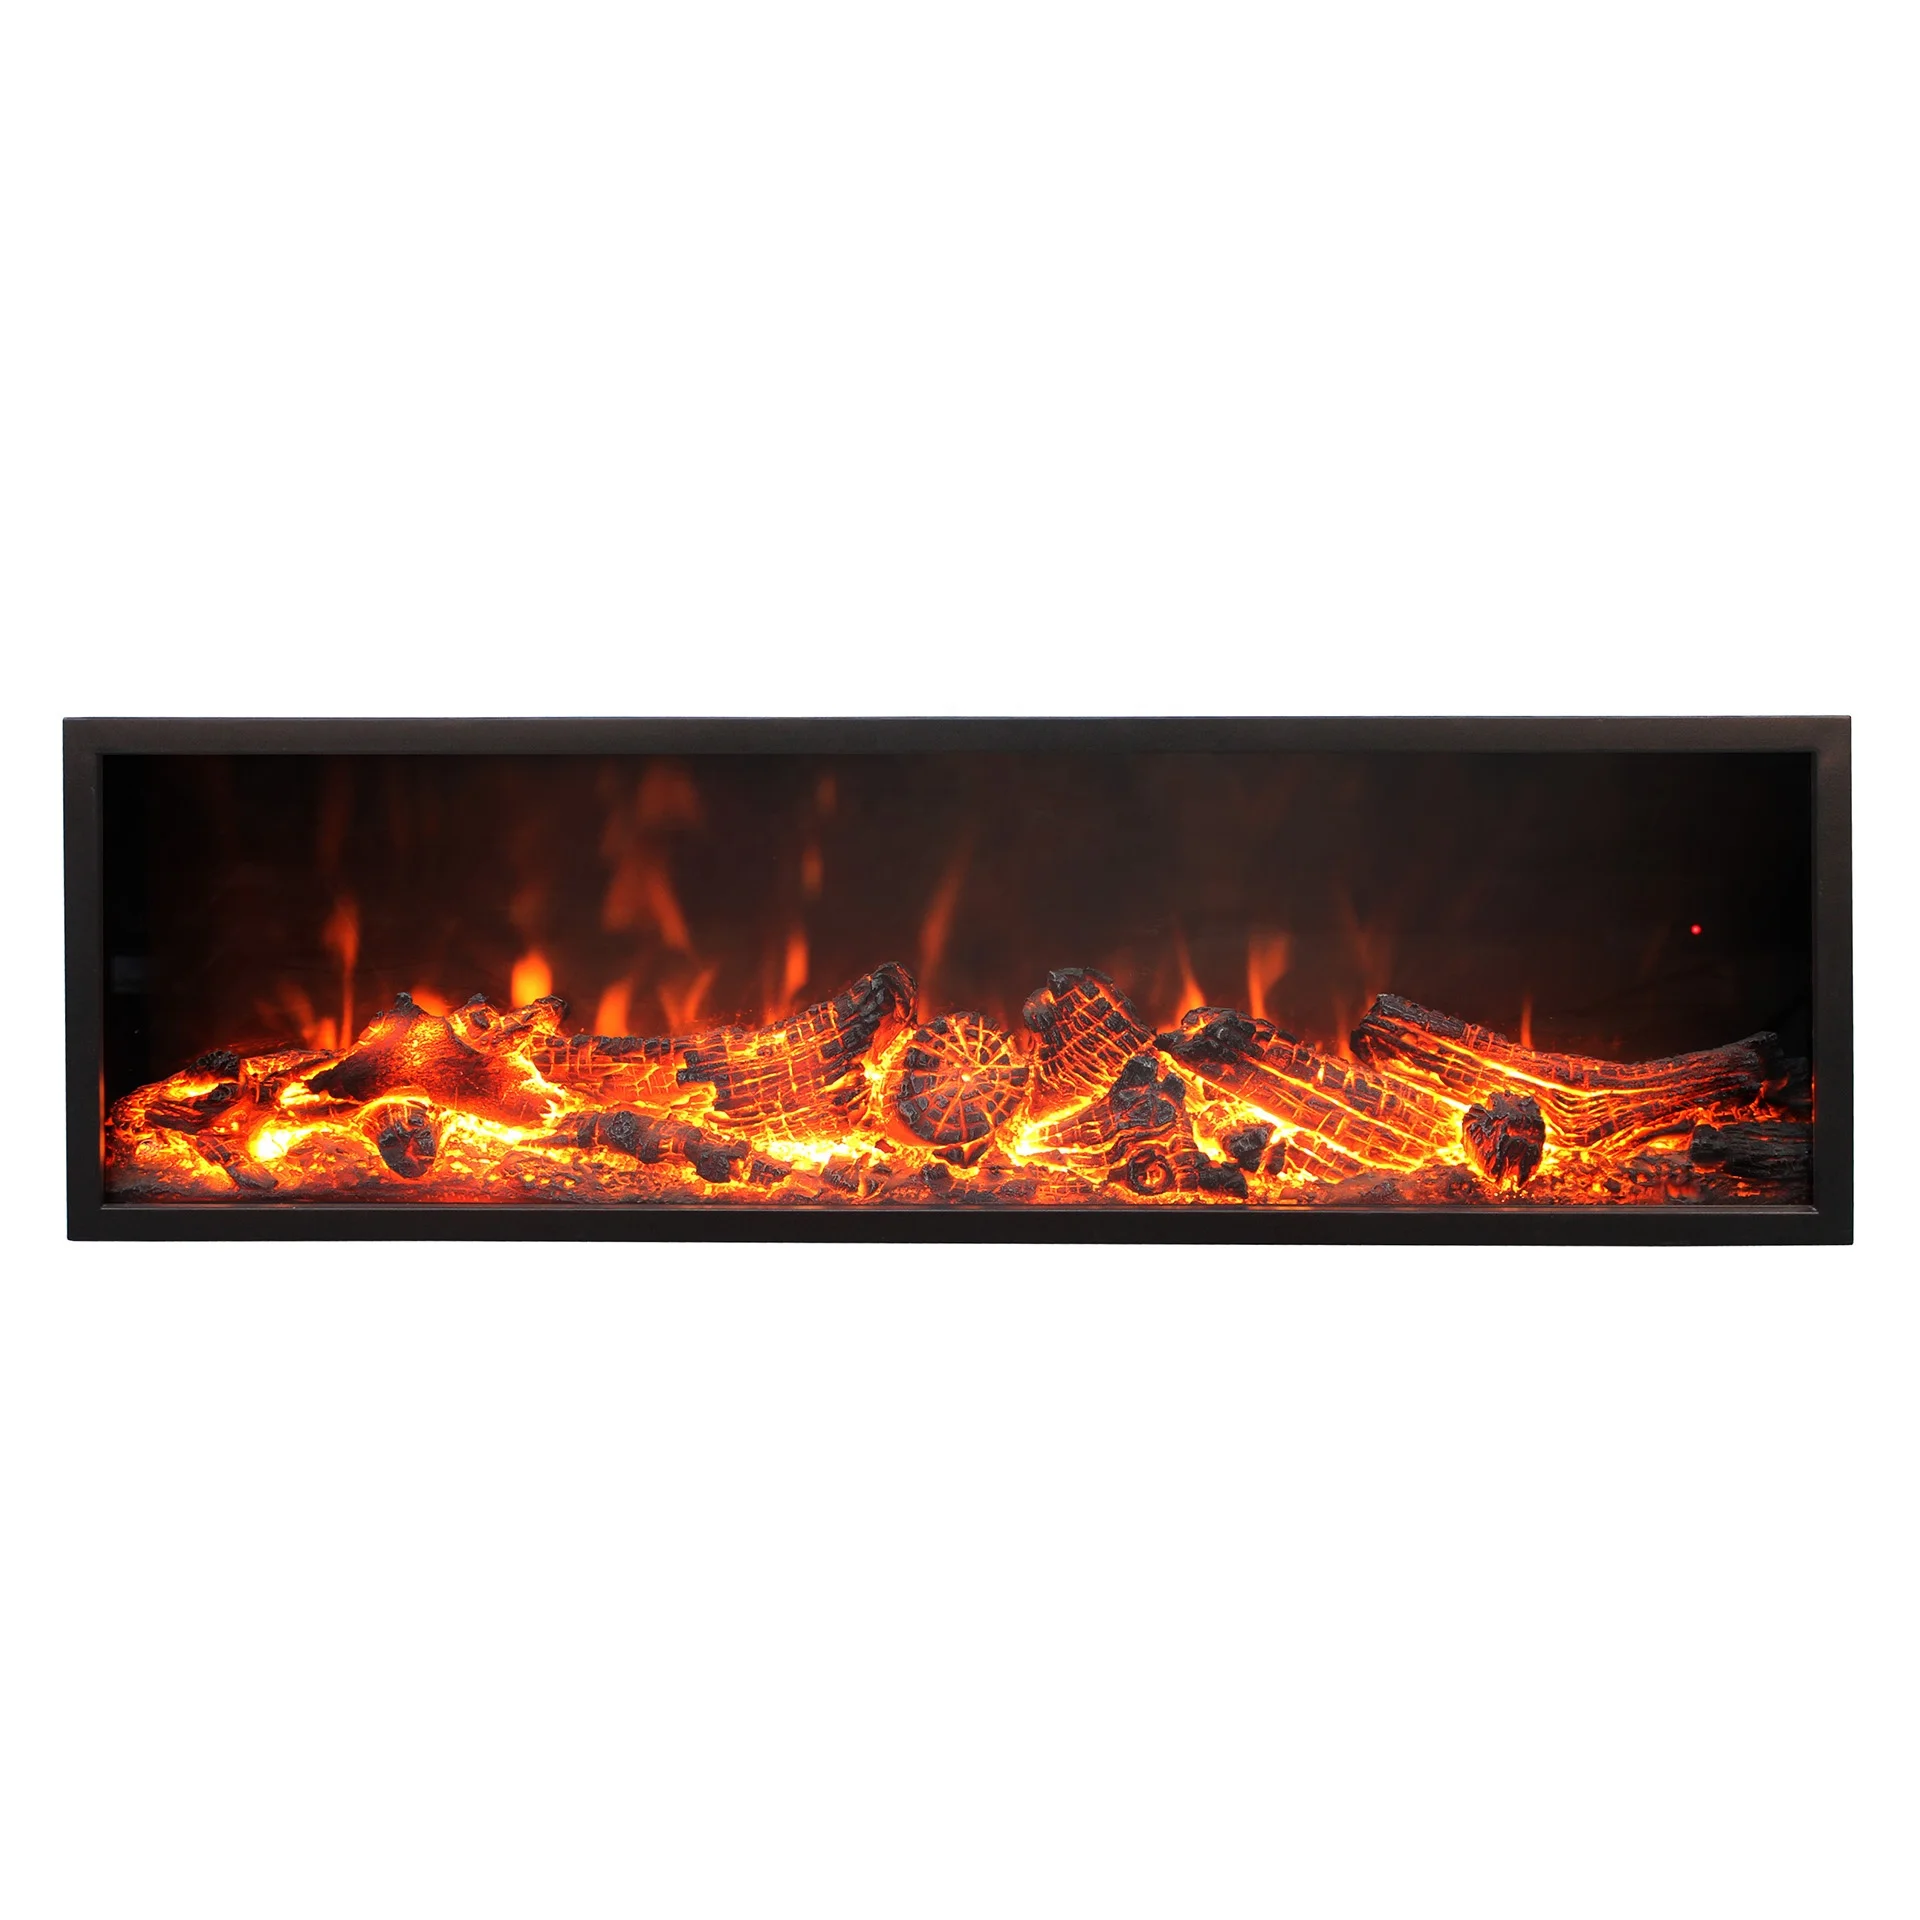 TruFlame 2kW Black Curved Glass Screen Wall Mounted Fire Flame Effect Fireplace 